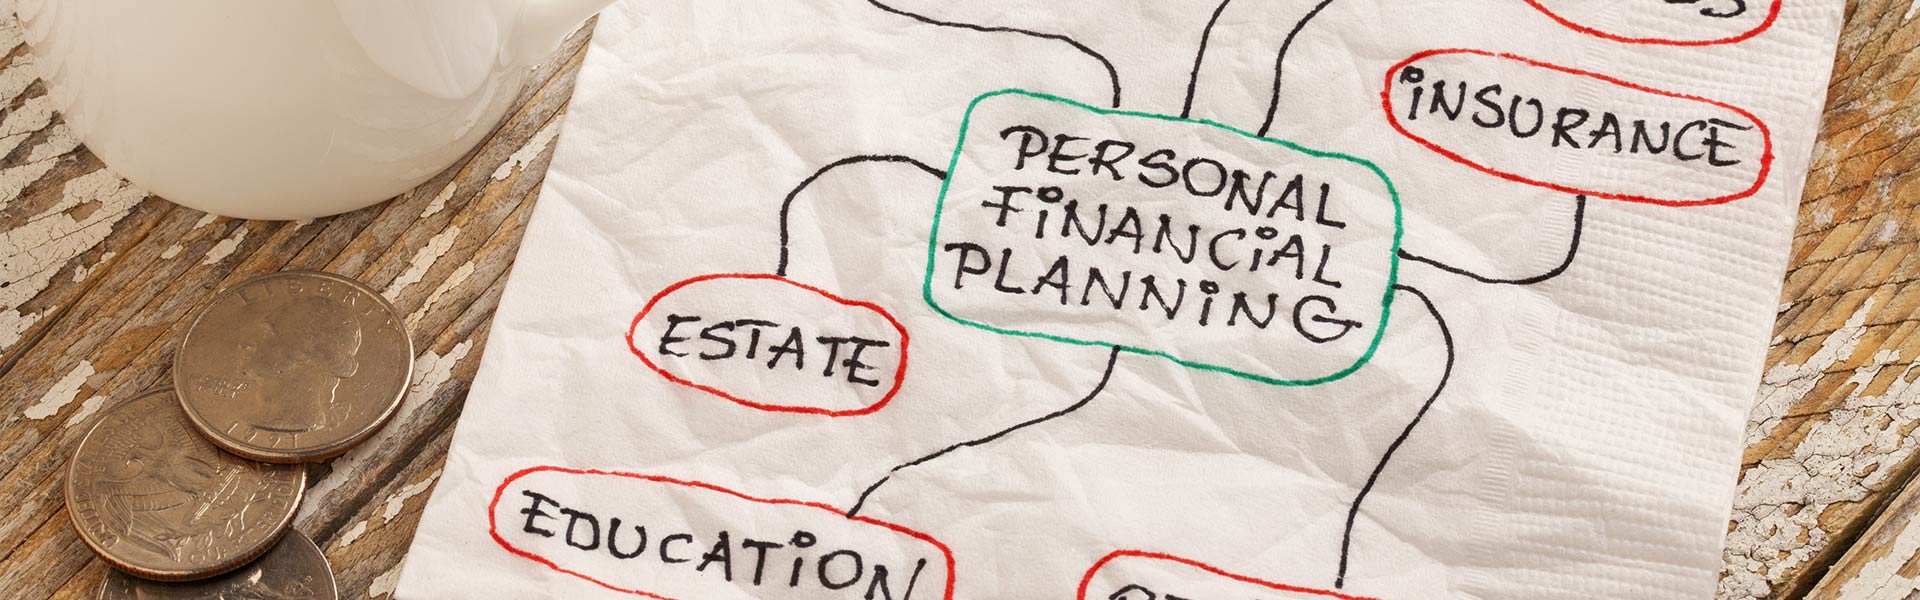 Personal financial planning tree